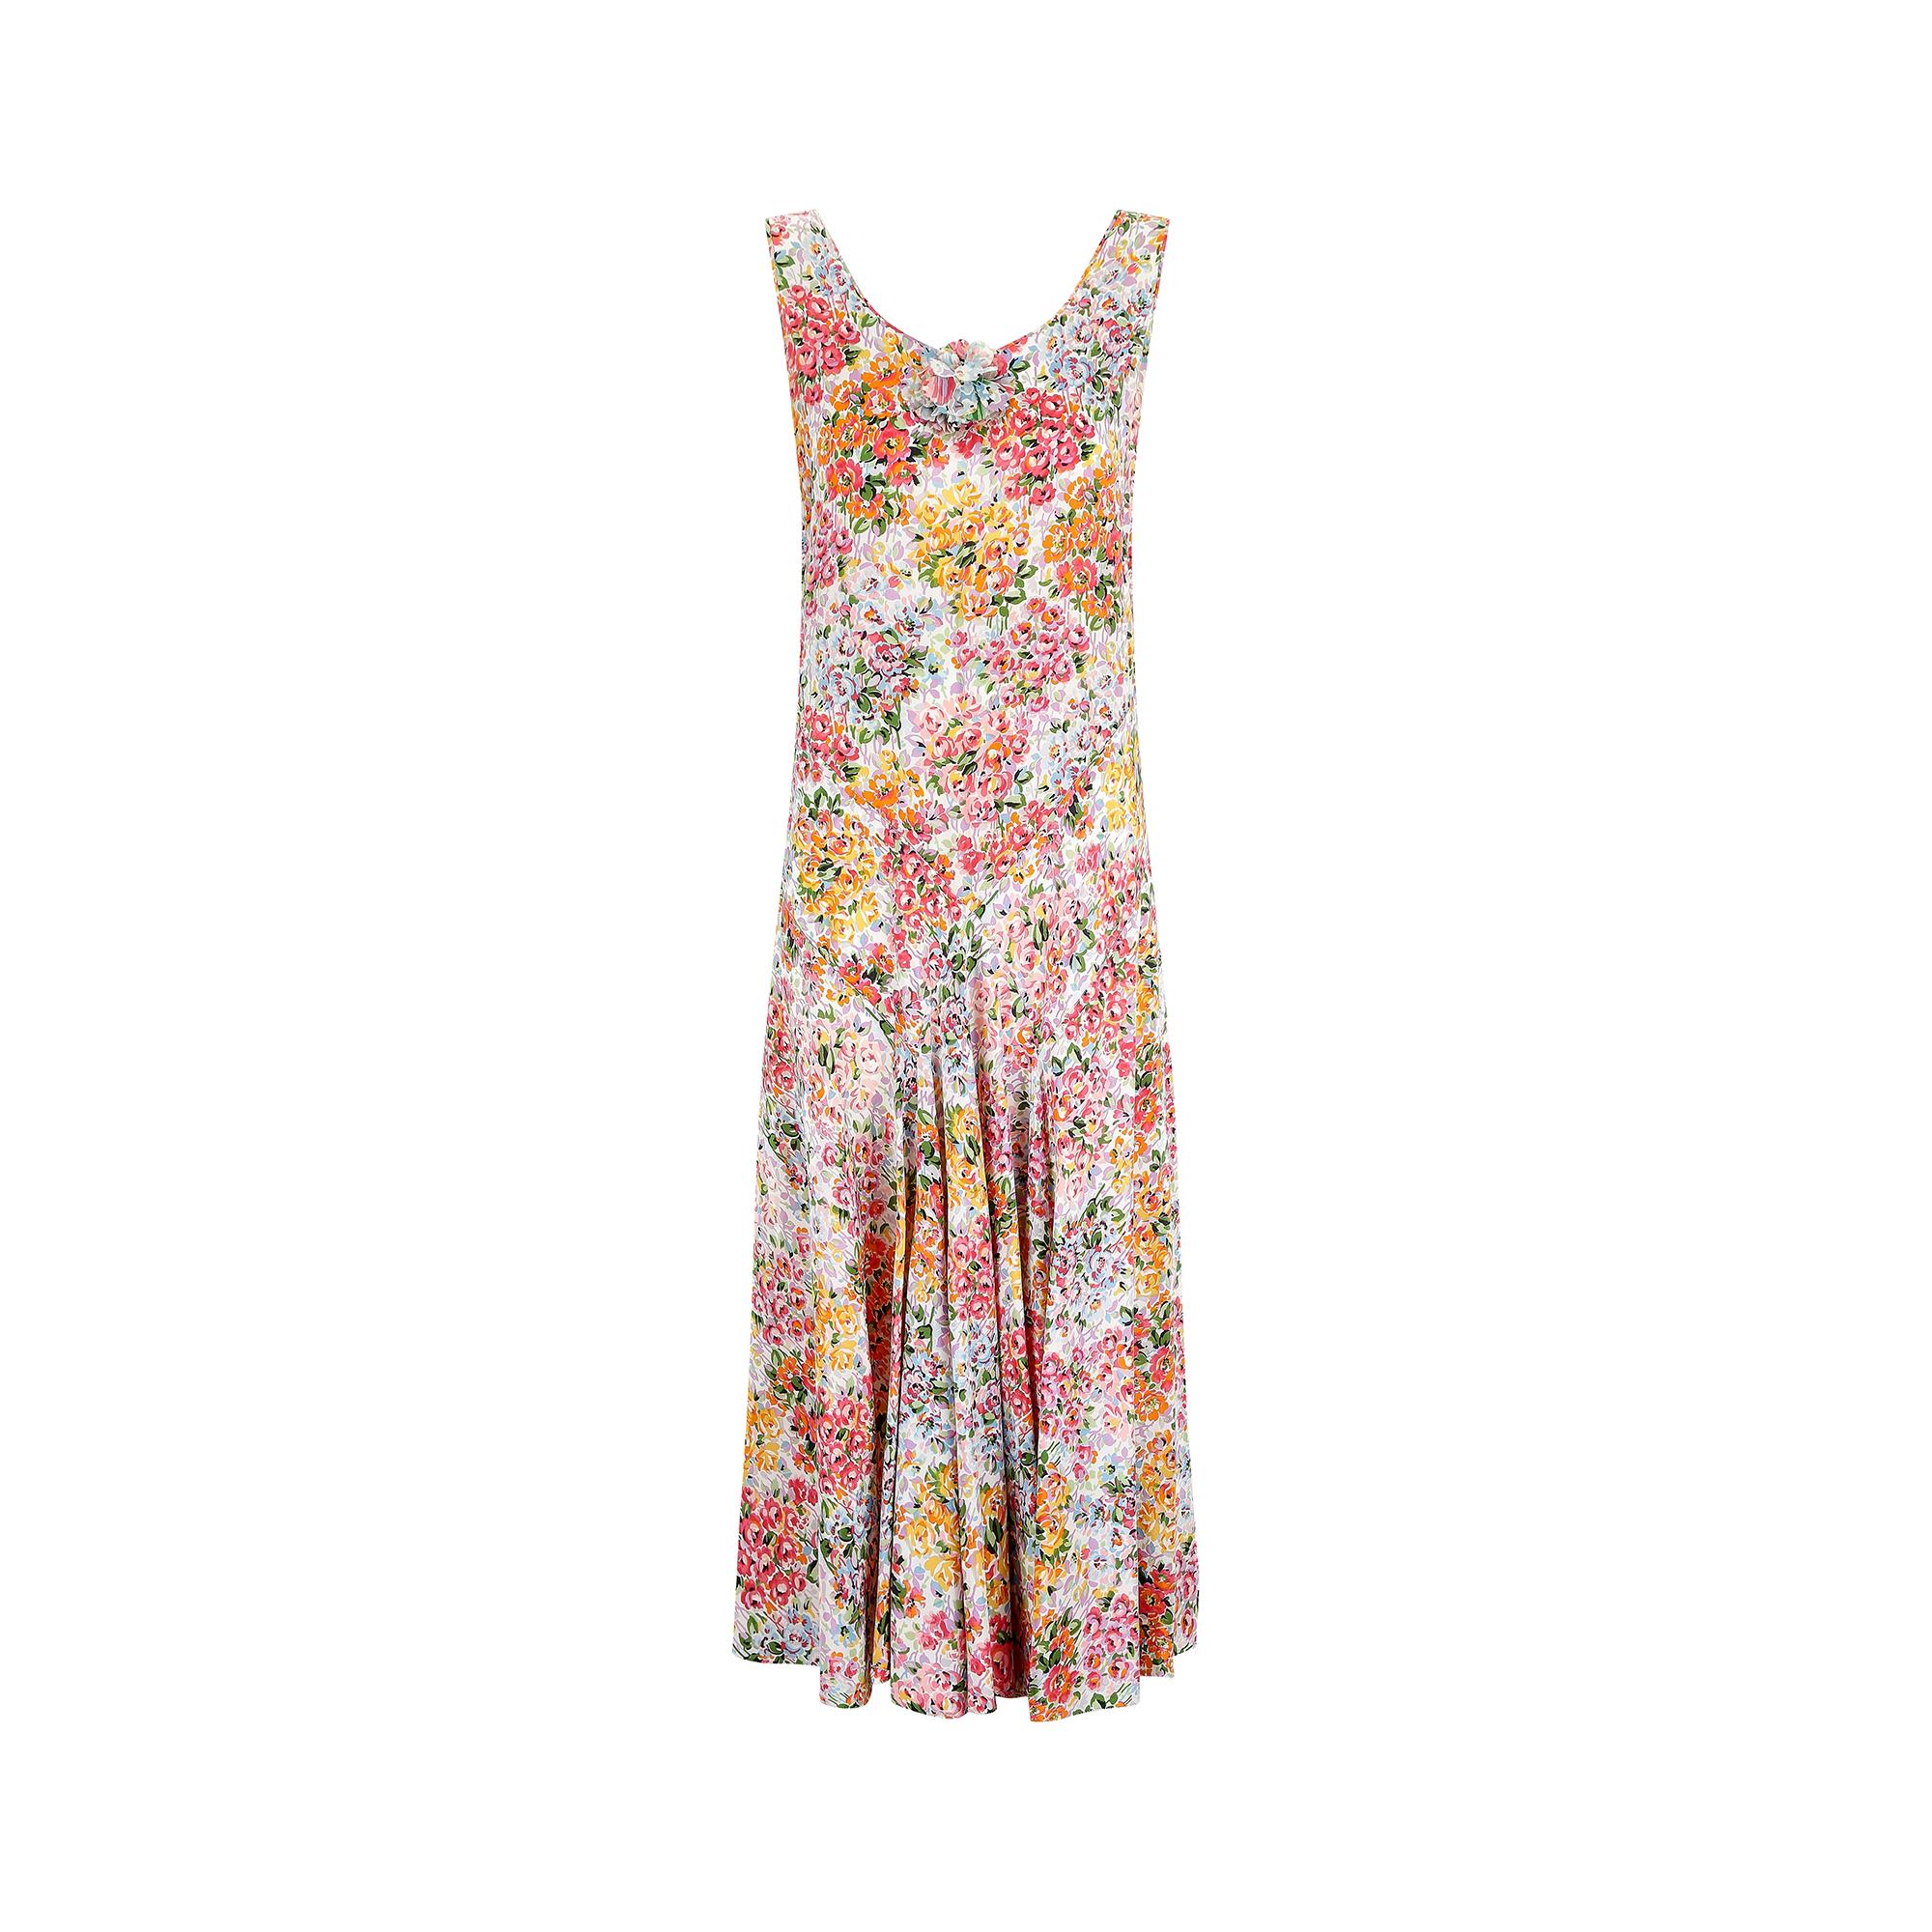 1930s silk bias cut dress in a beautiful 'cottage' style floral print, perfect for spring and summer. It features a rounded neckline with a front floral applique for an added feminine touch. The dress has a straight cut torso with inverted waistband